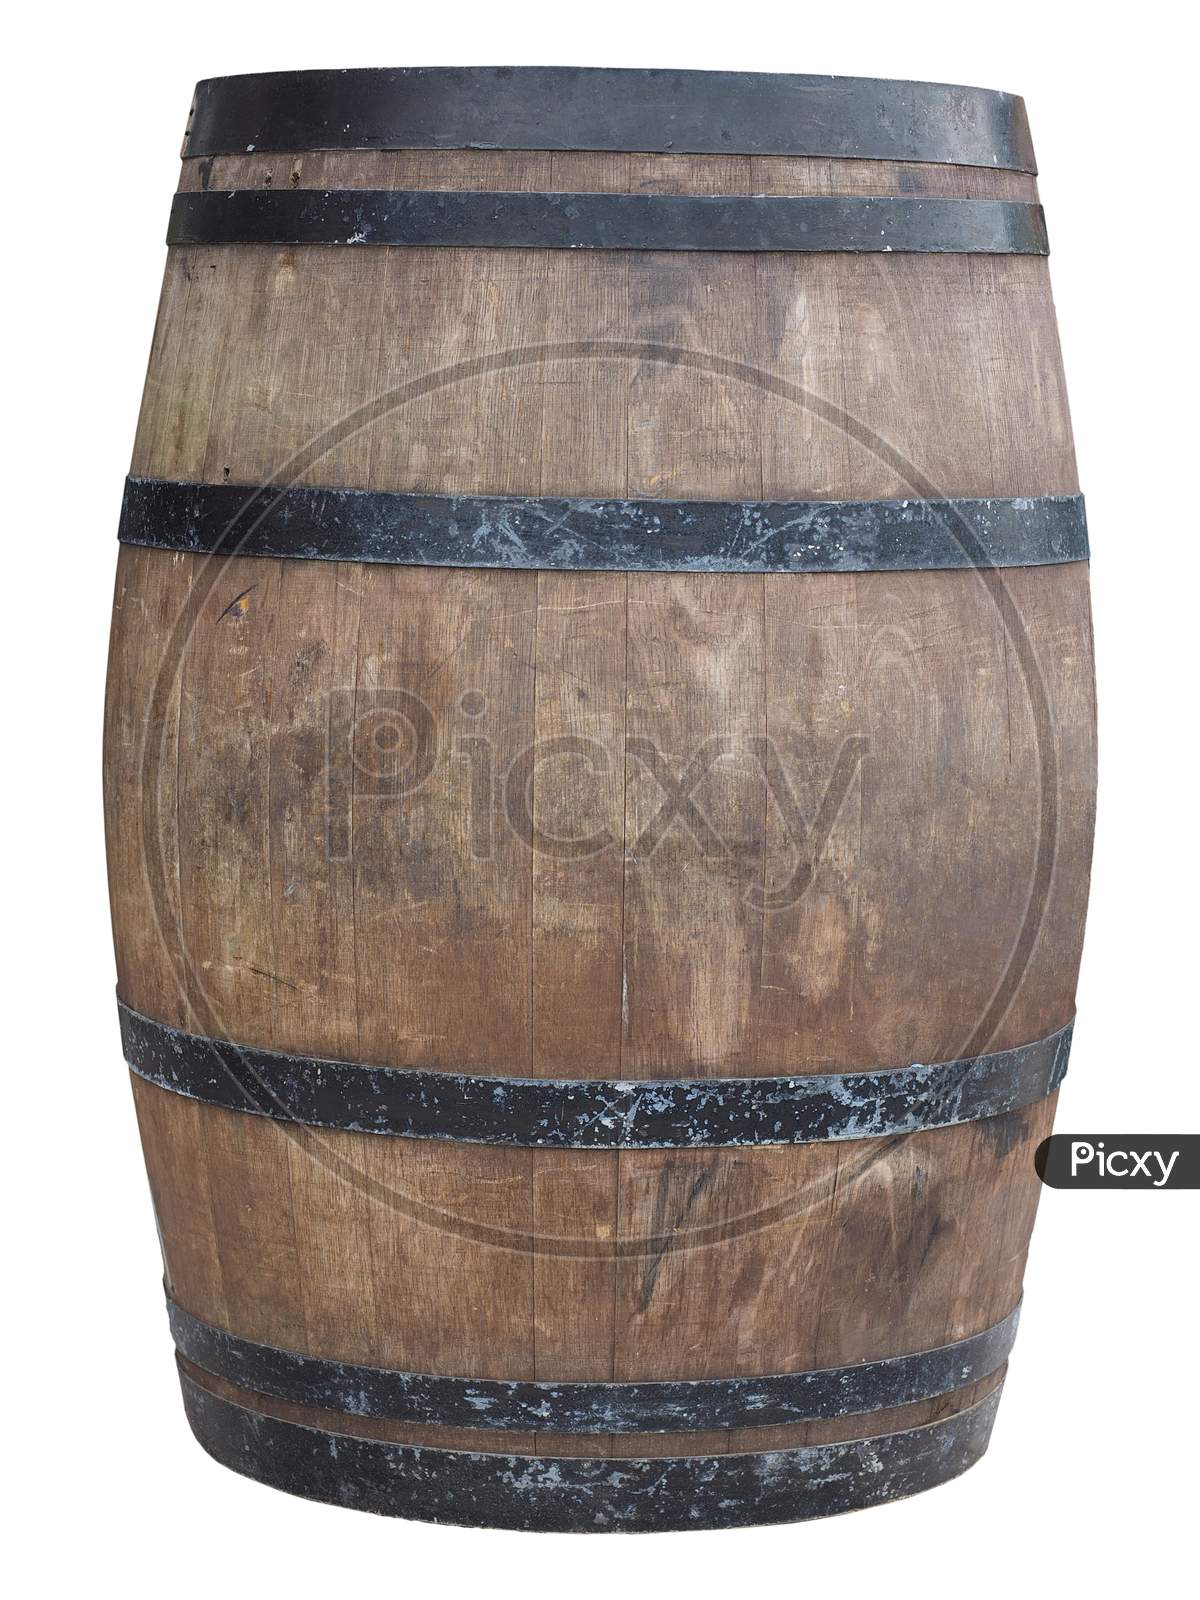 Barrel Cask For Wine Isolated Over White